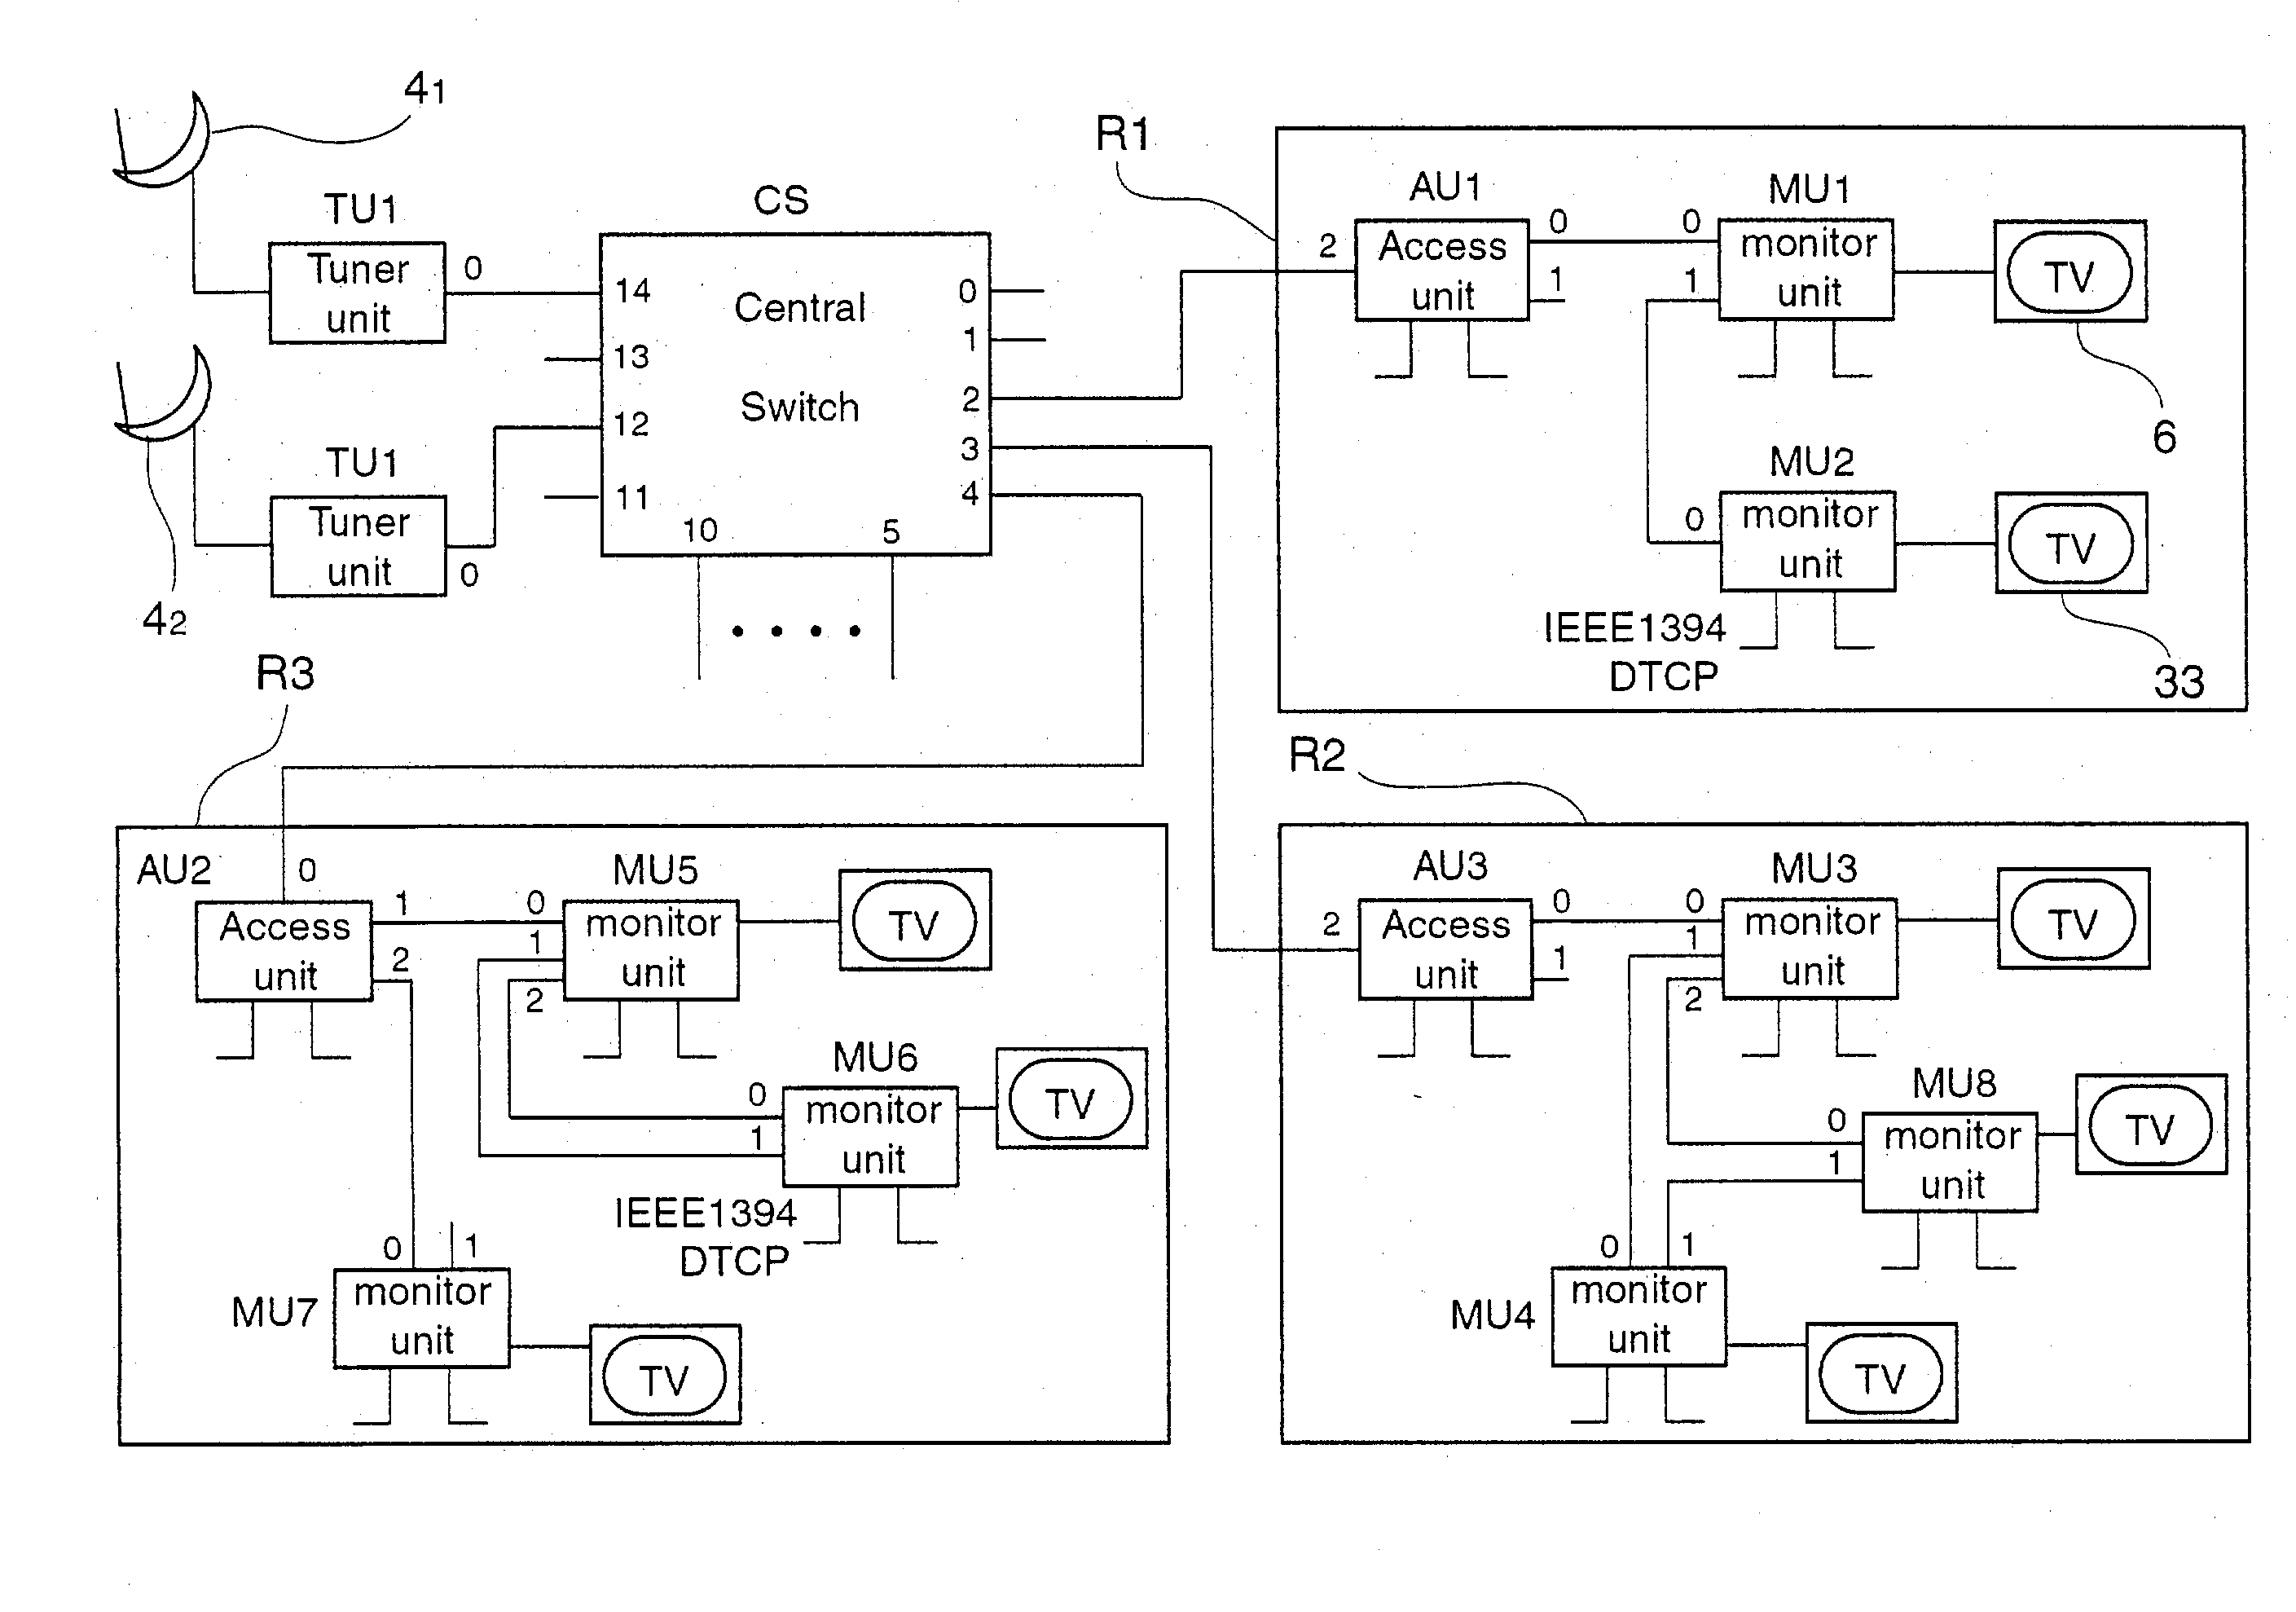 System for the transmission of audiovisual signals between source nodes and destination nodes